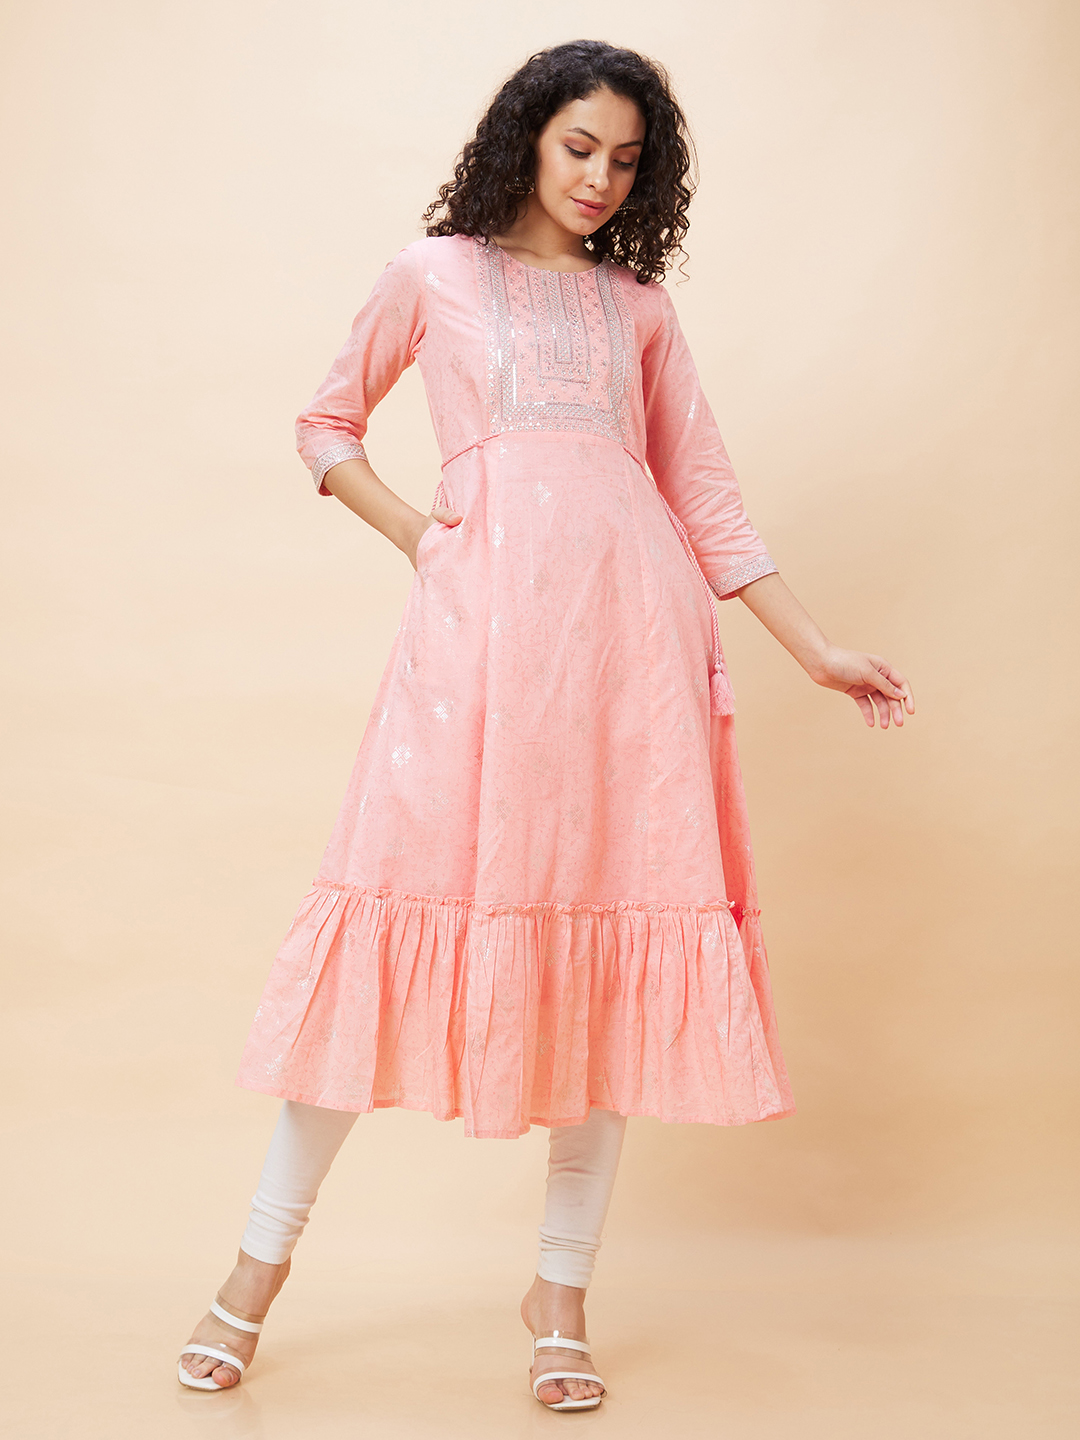 Globus Women Peach Ethnic Motifs Print Round Neck Flared Tiered A-Line Festive Kurta with Yoke Sequinned and Tie Up Details